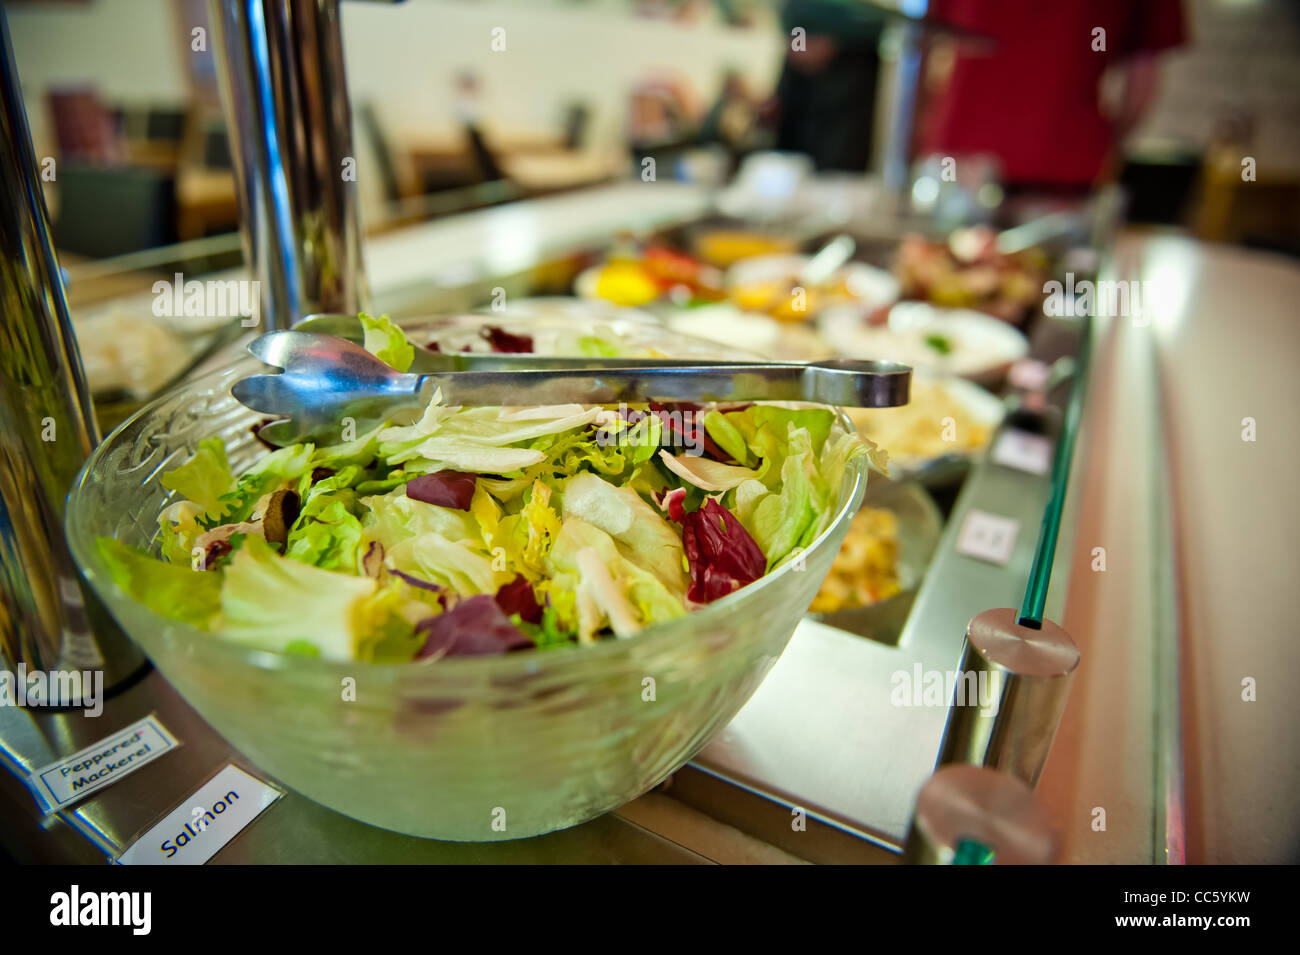 Buffet counter of salad cold meats fruits rice and pasta Stock Photo